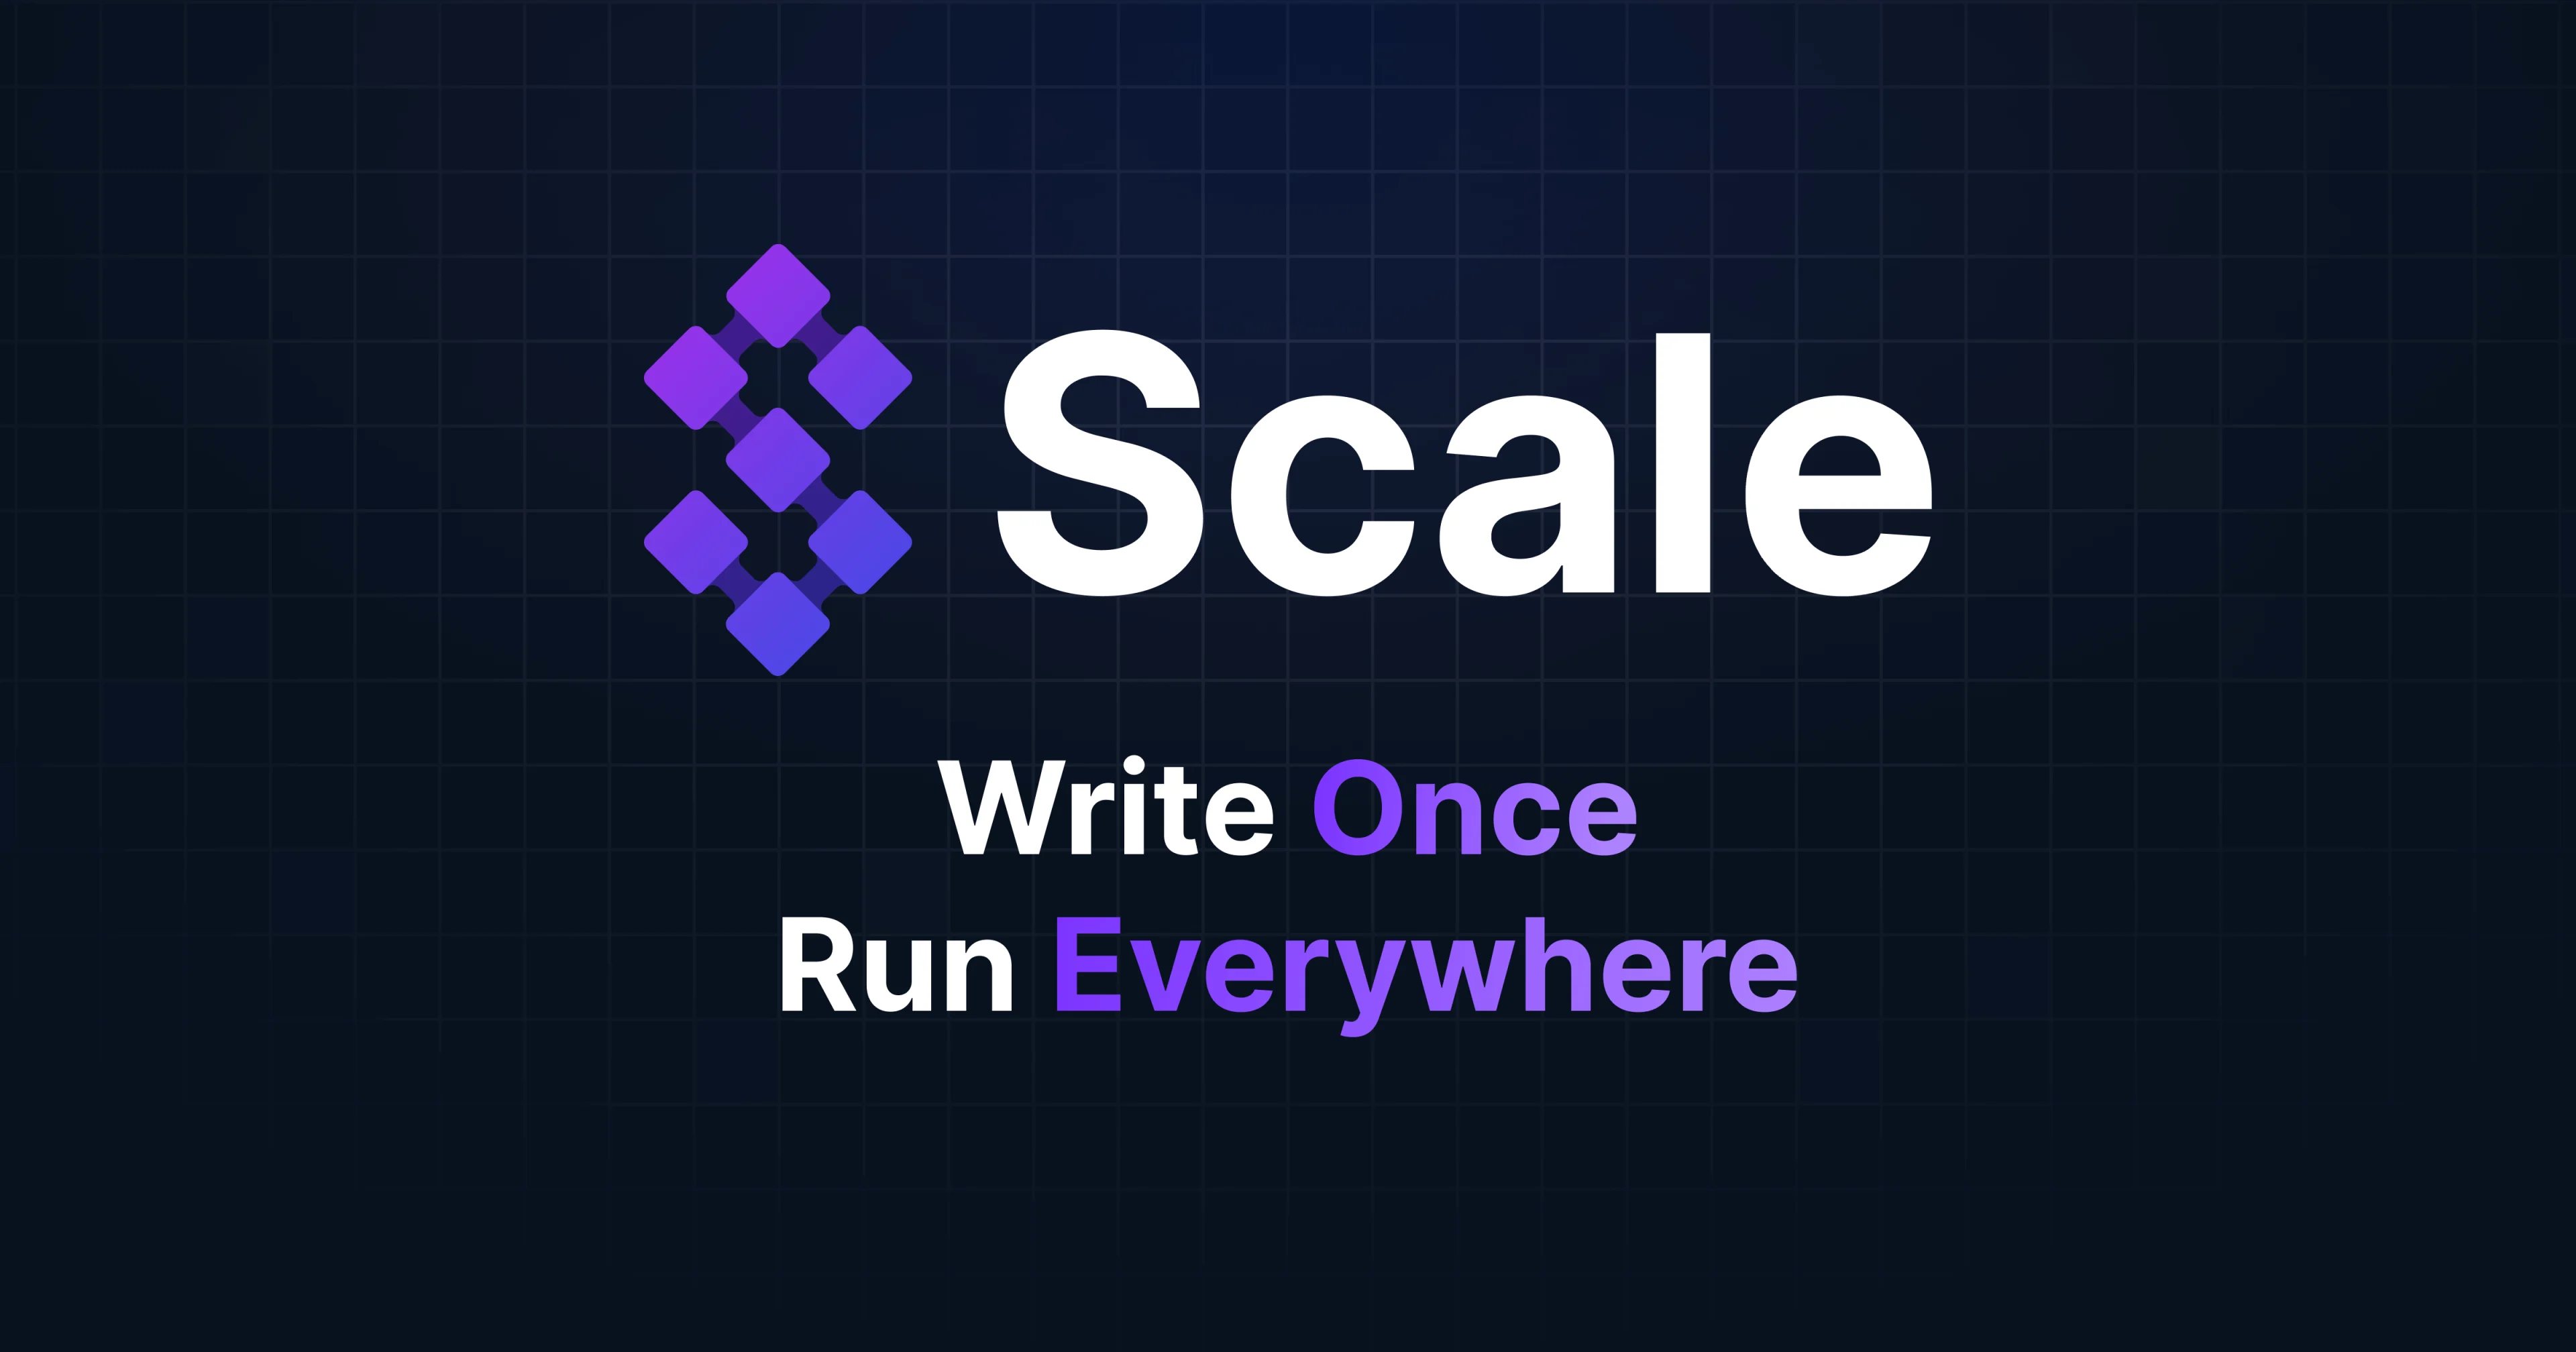 The Scale logo, which is a series of boxes connected with lines ni the shape of an S. Below the log it says "Write Once, Run Everywhere."